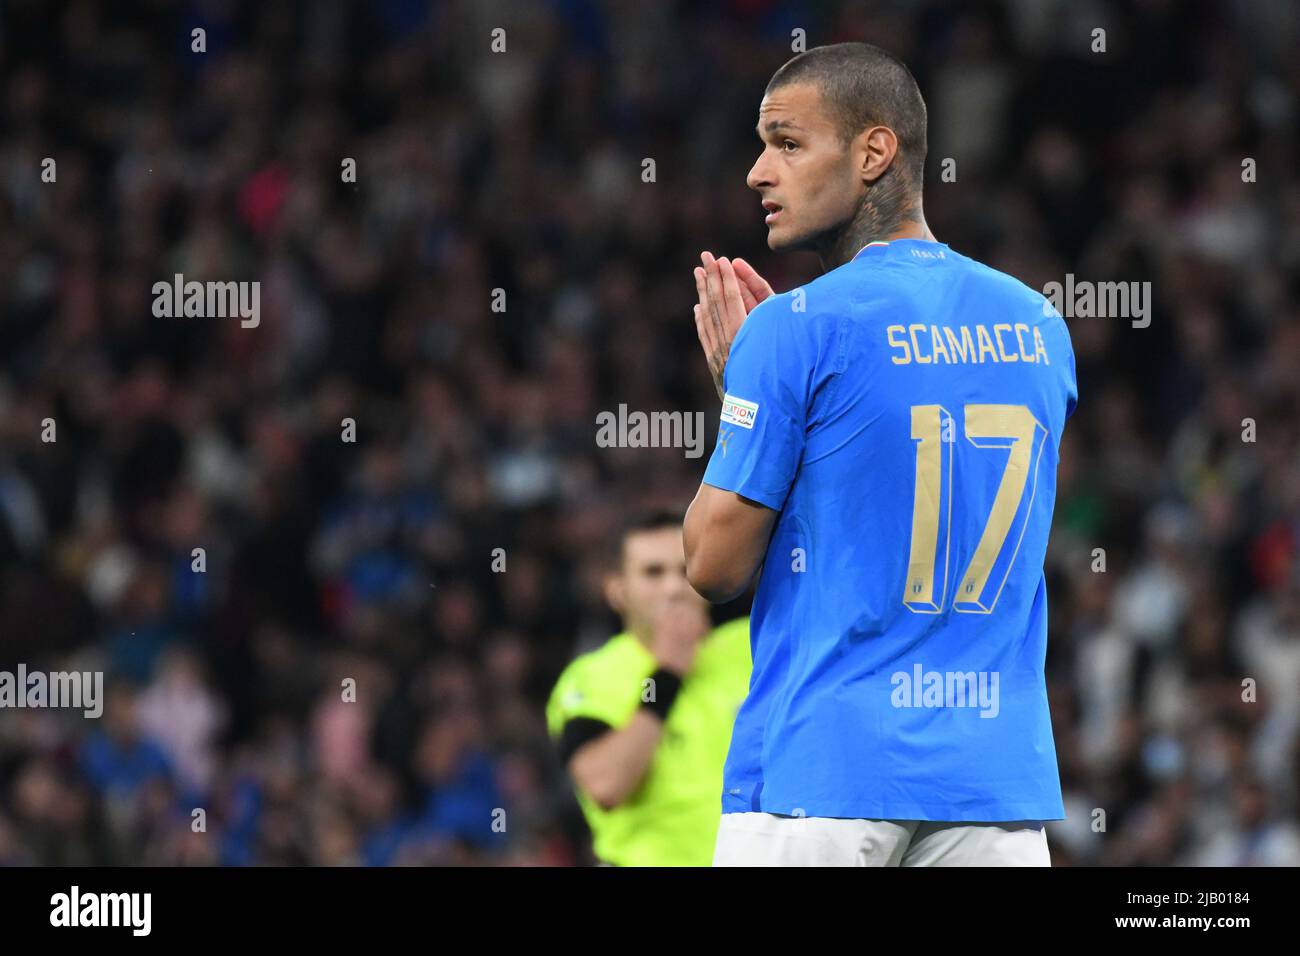 WEMBLEY, ENGLAND - JUNE 1: Gianluca Scamacca of Italy looks on during the Finalissima match between Italy and Argentina at Wembley Stadium on June 1, 2022 in Wembley, England. (Photo by Sara Aribó/PxImages) Credit: Px Images/Alamy Live News Stock Photo